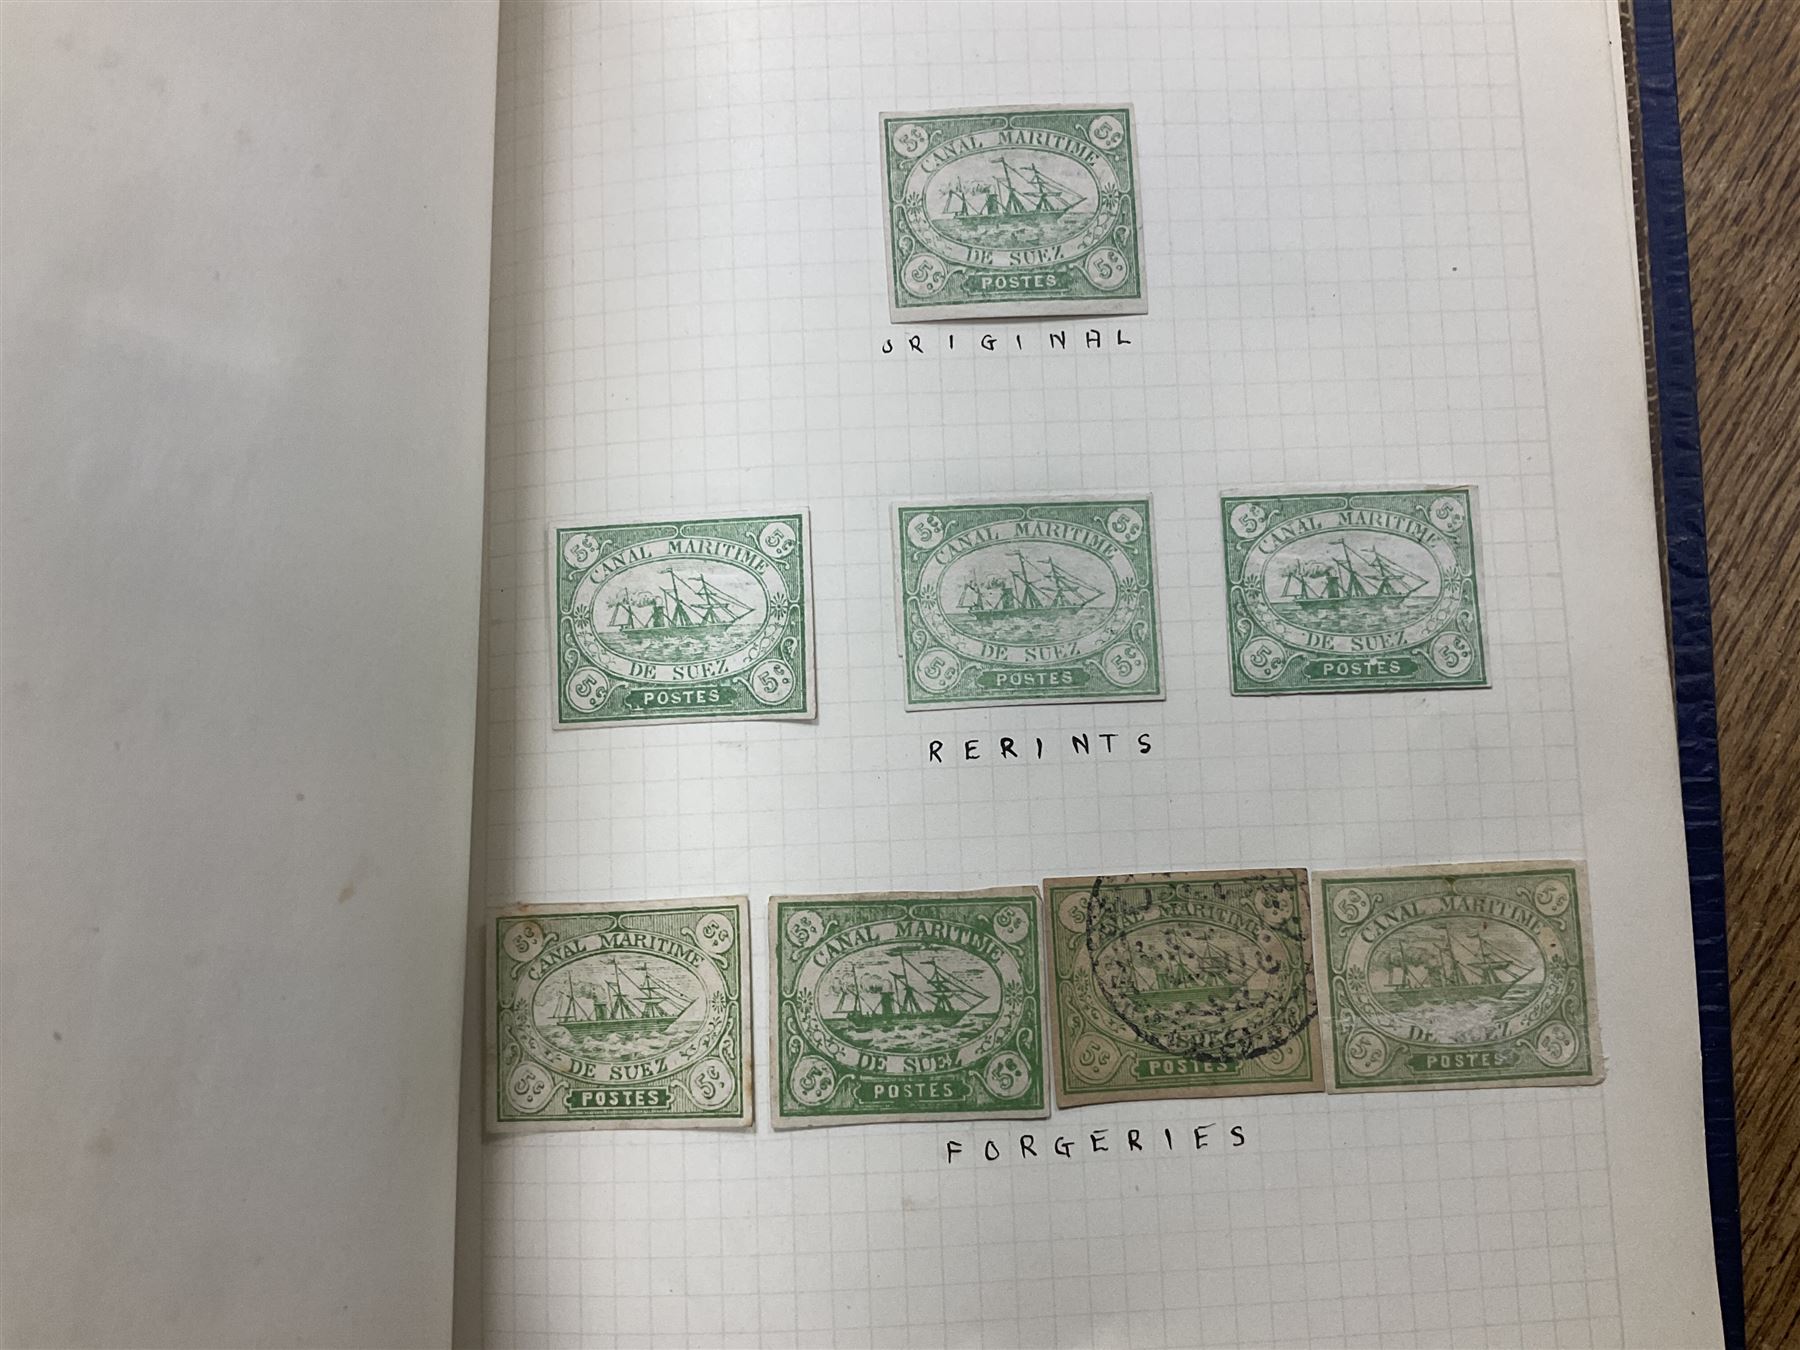 Egypt 1866 and later stamps - Image 622 of 761